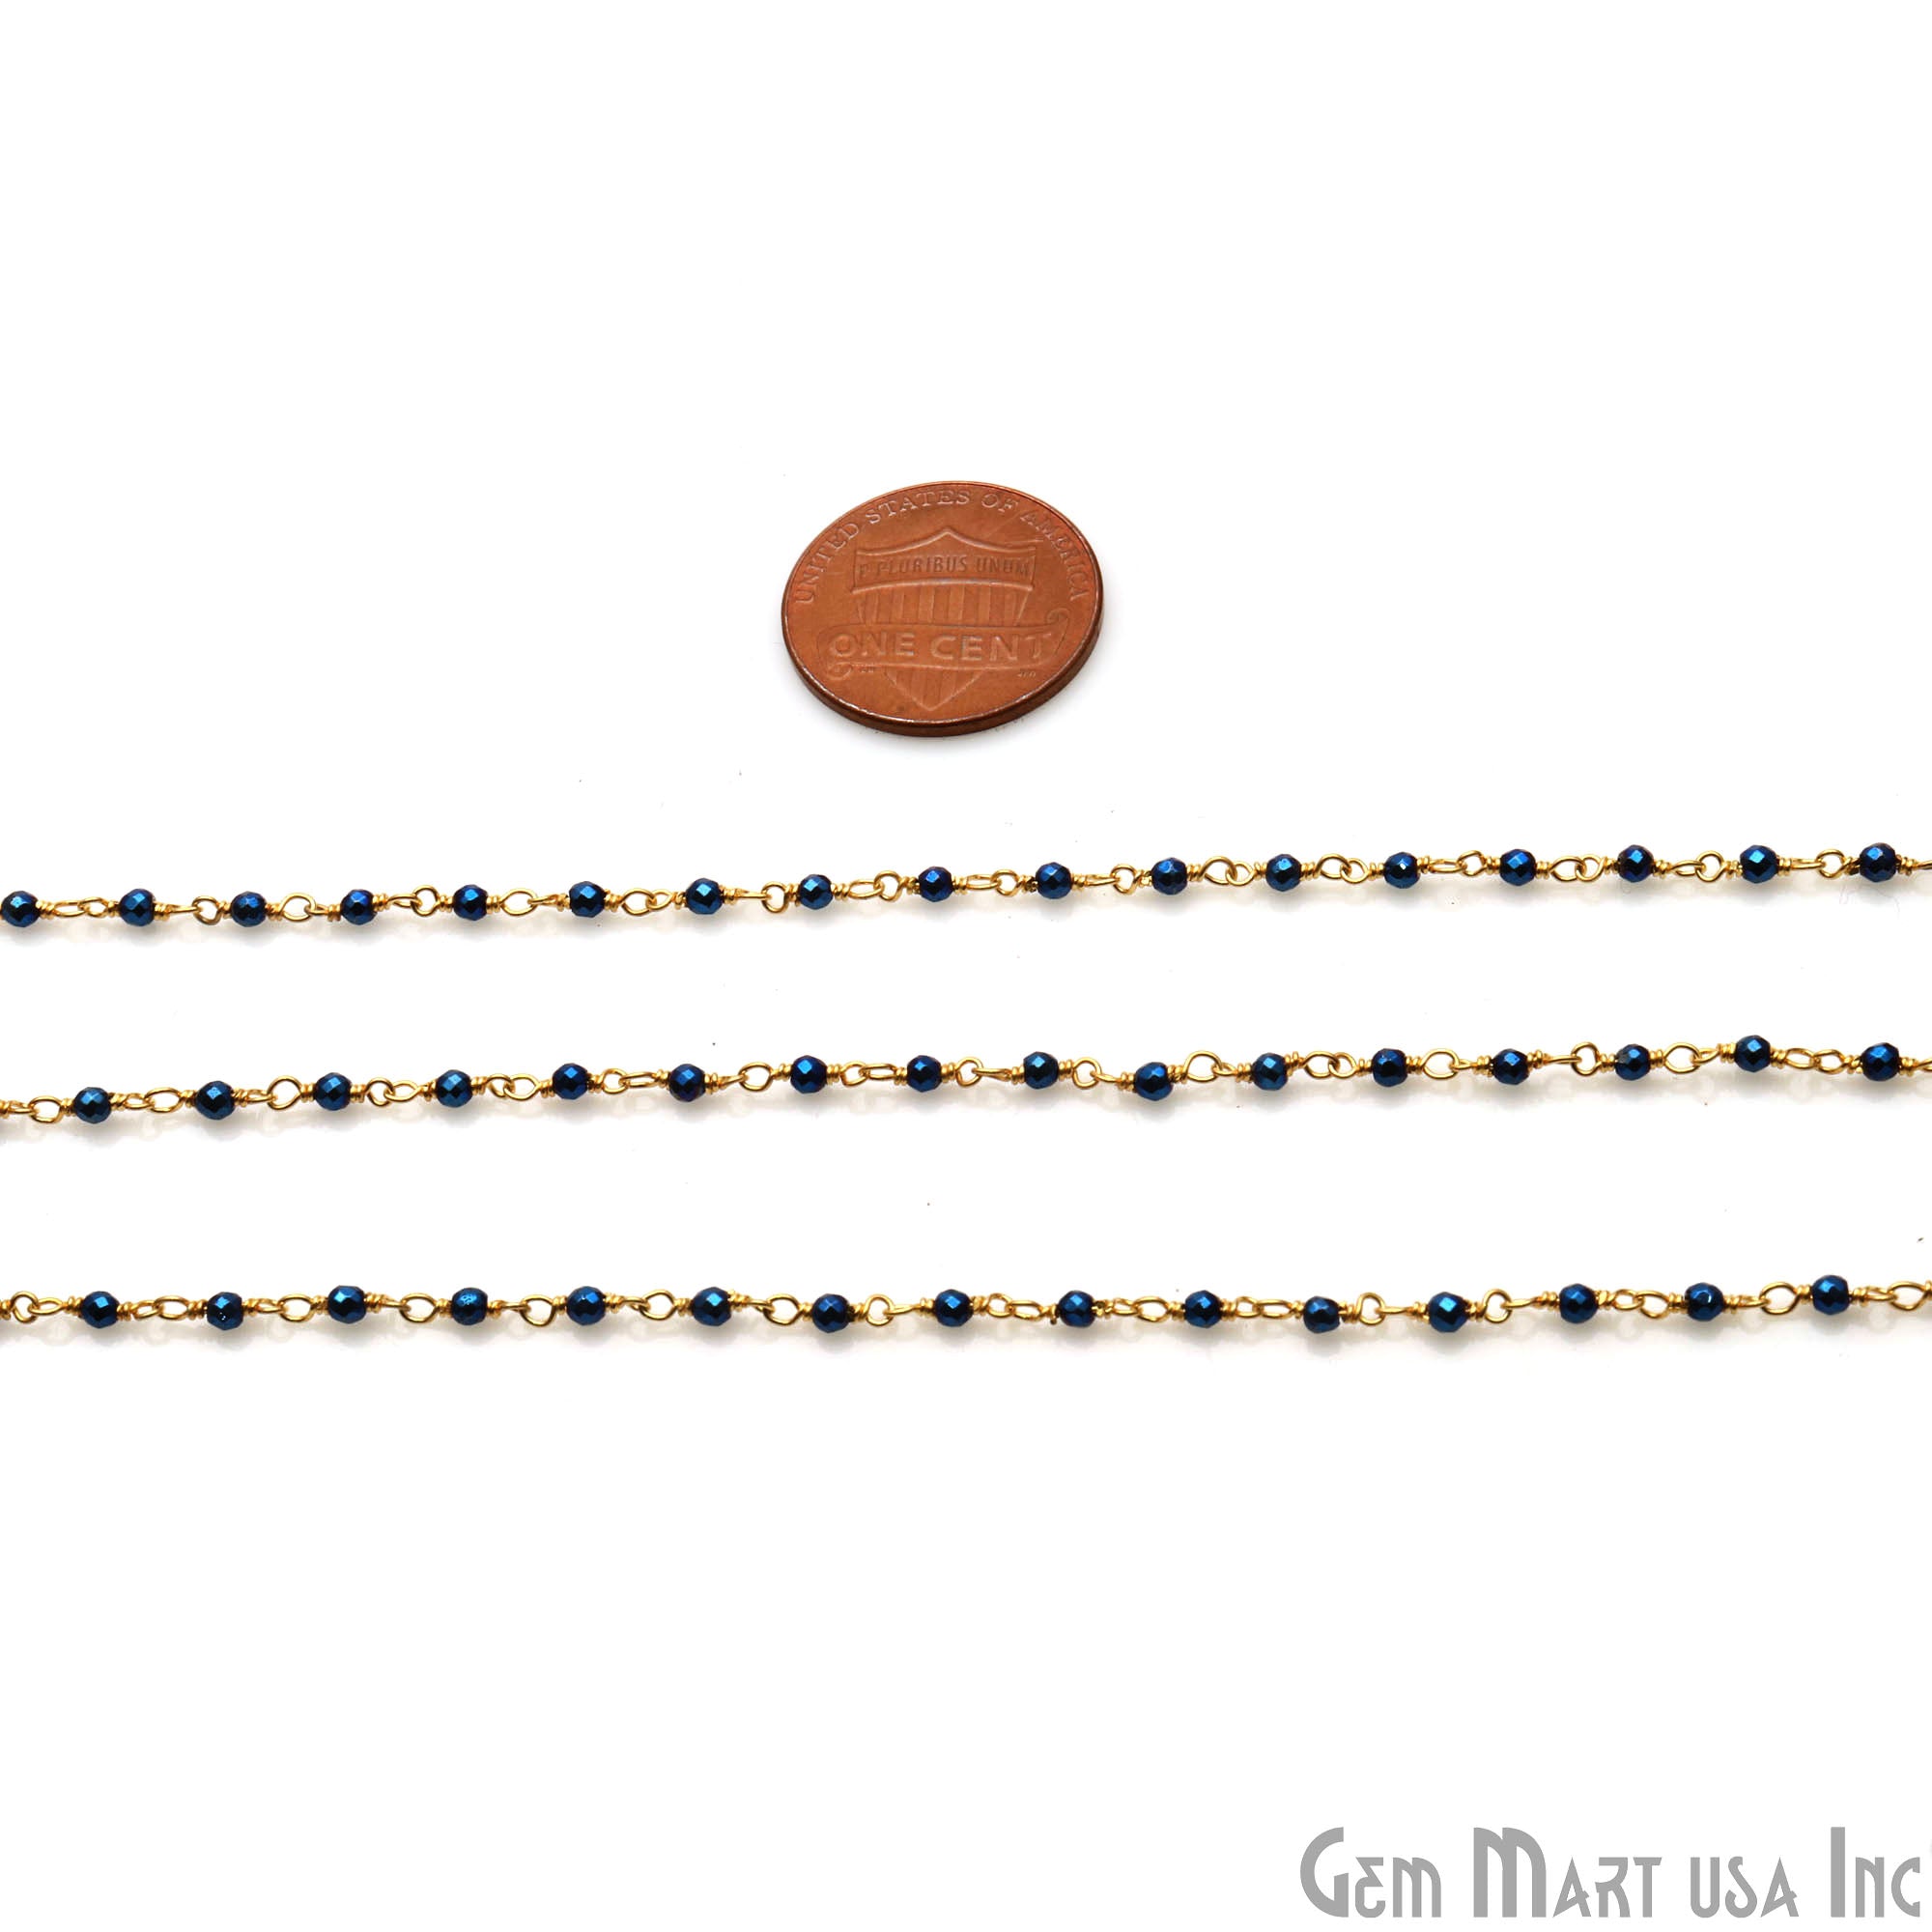 Metallic Blue Pyrite 2-2.5mm Tiny Beads Gold Plated Wire Wrapped Rosary Chain - GemMartUSA